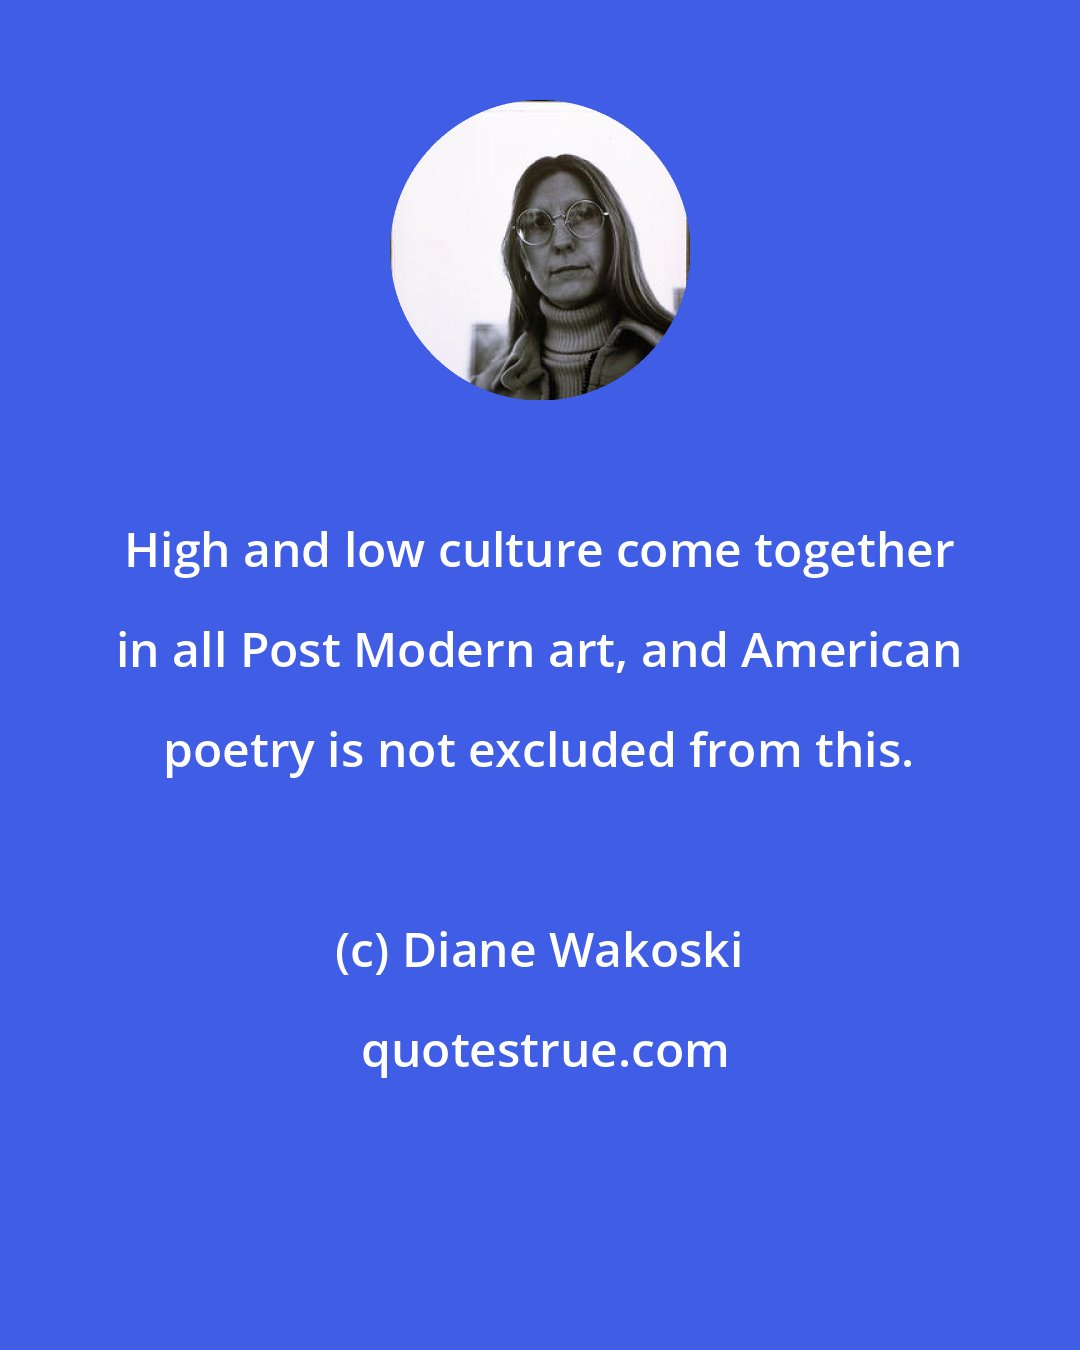 Diane Wakoski: High and low culture come together in all Post Modern art, and American poetry is not excluded from this.